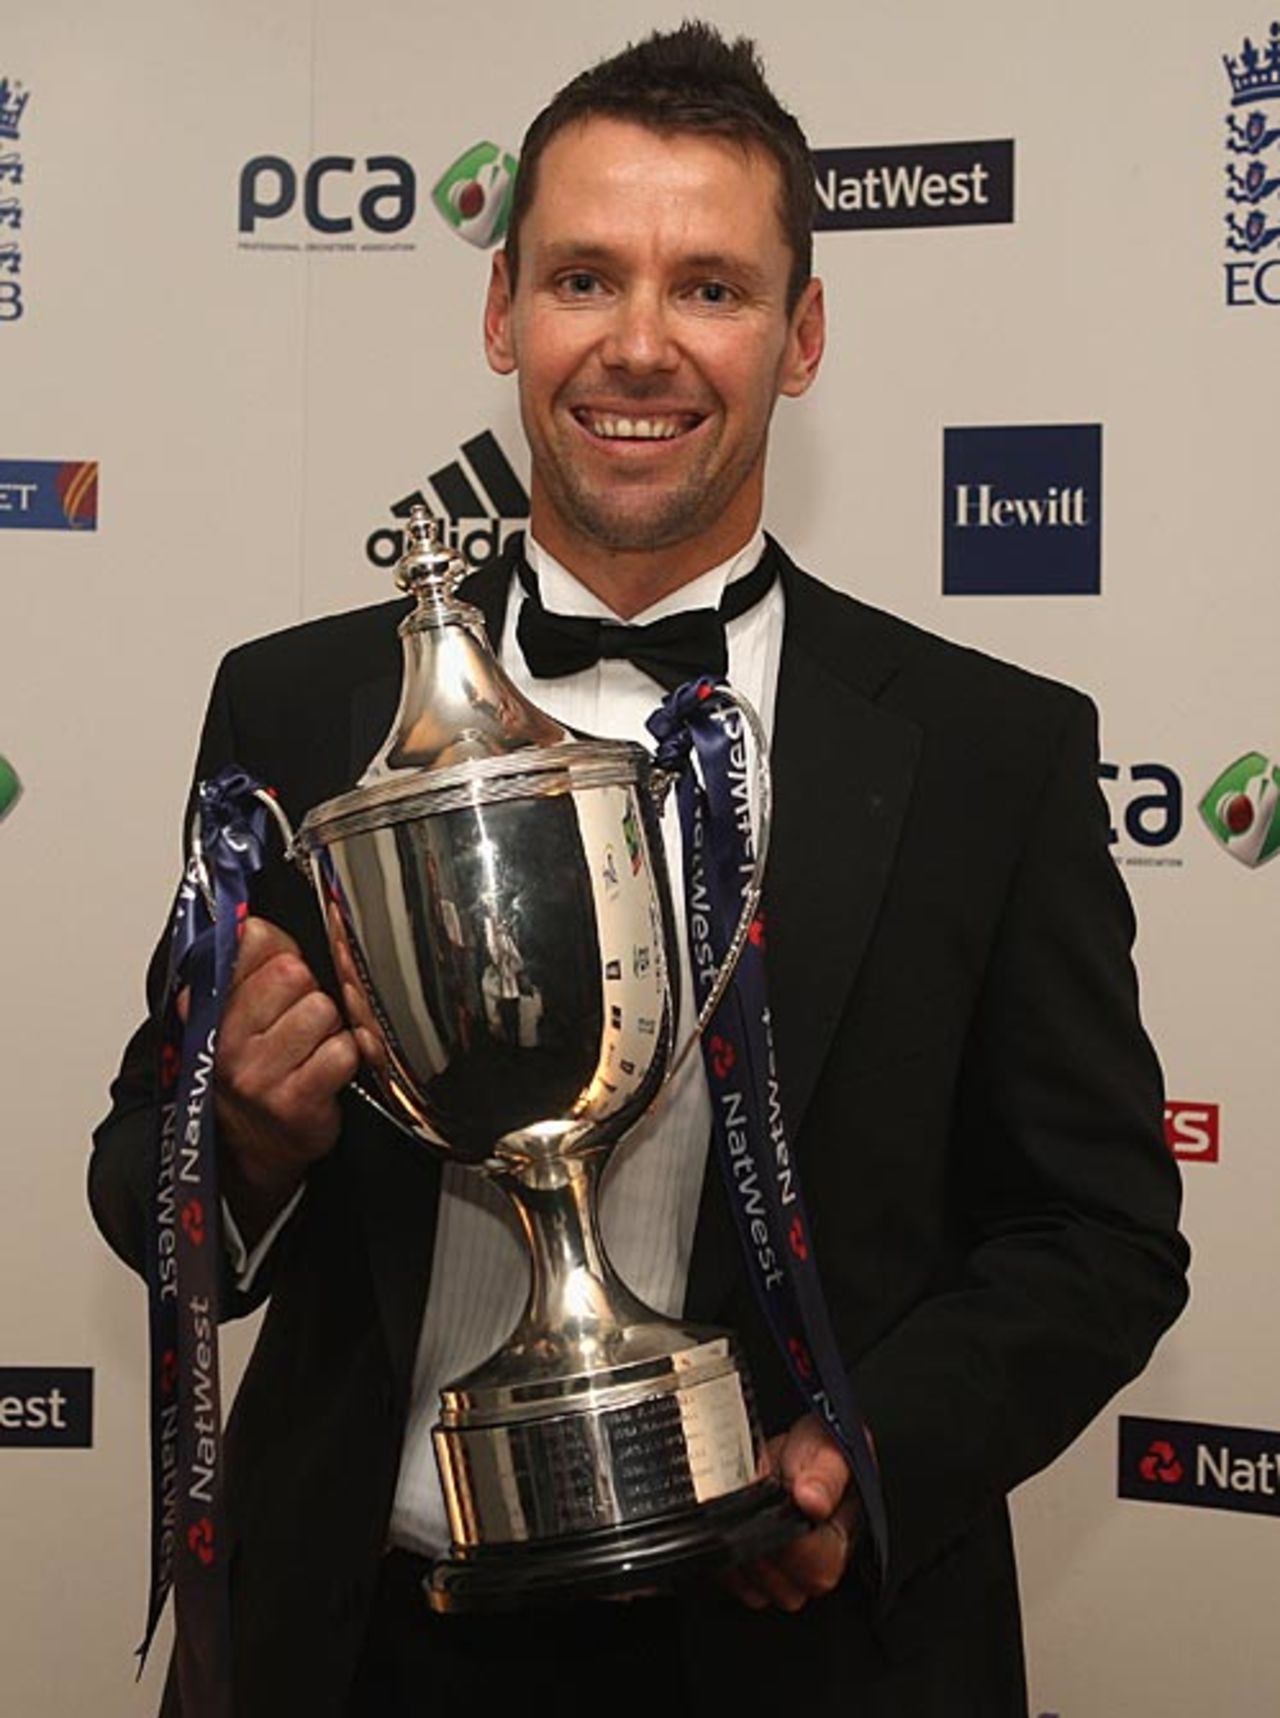 Kent's Martin van Jaarsveld with his Player-of-the-Year trophy, Professional Cricketers' Association awards, London, September 29, 2008